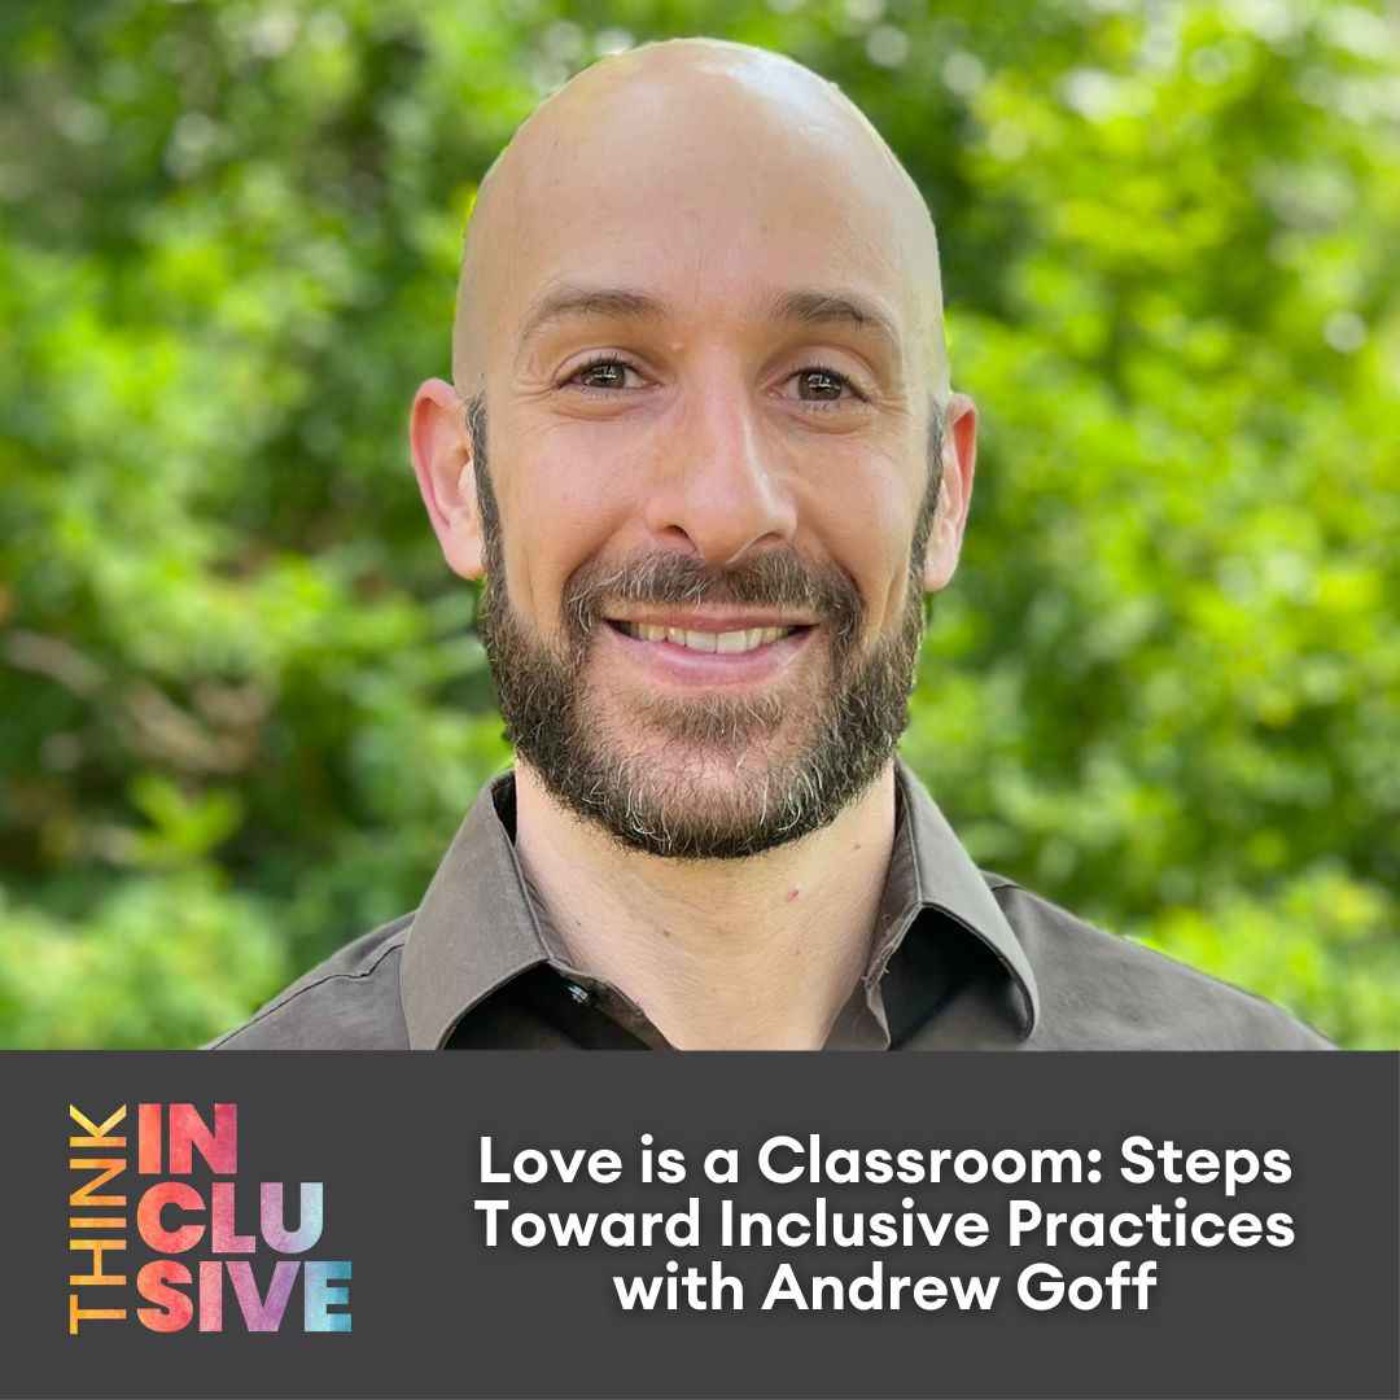 Love is a Classroom: Steps Toward Inclusive Practices with Andrew Goff